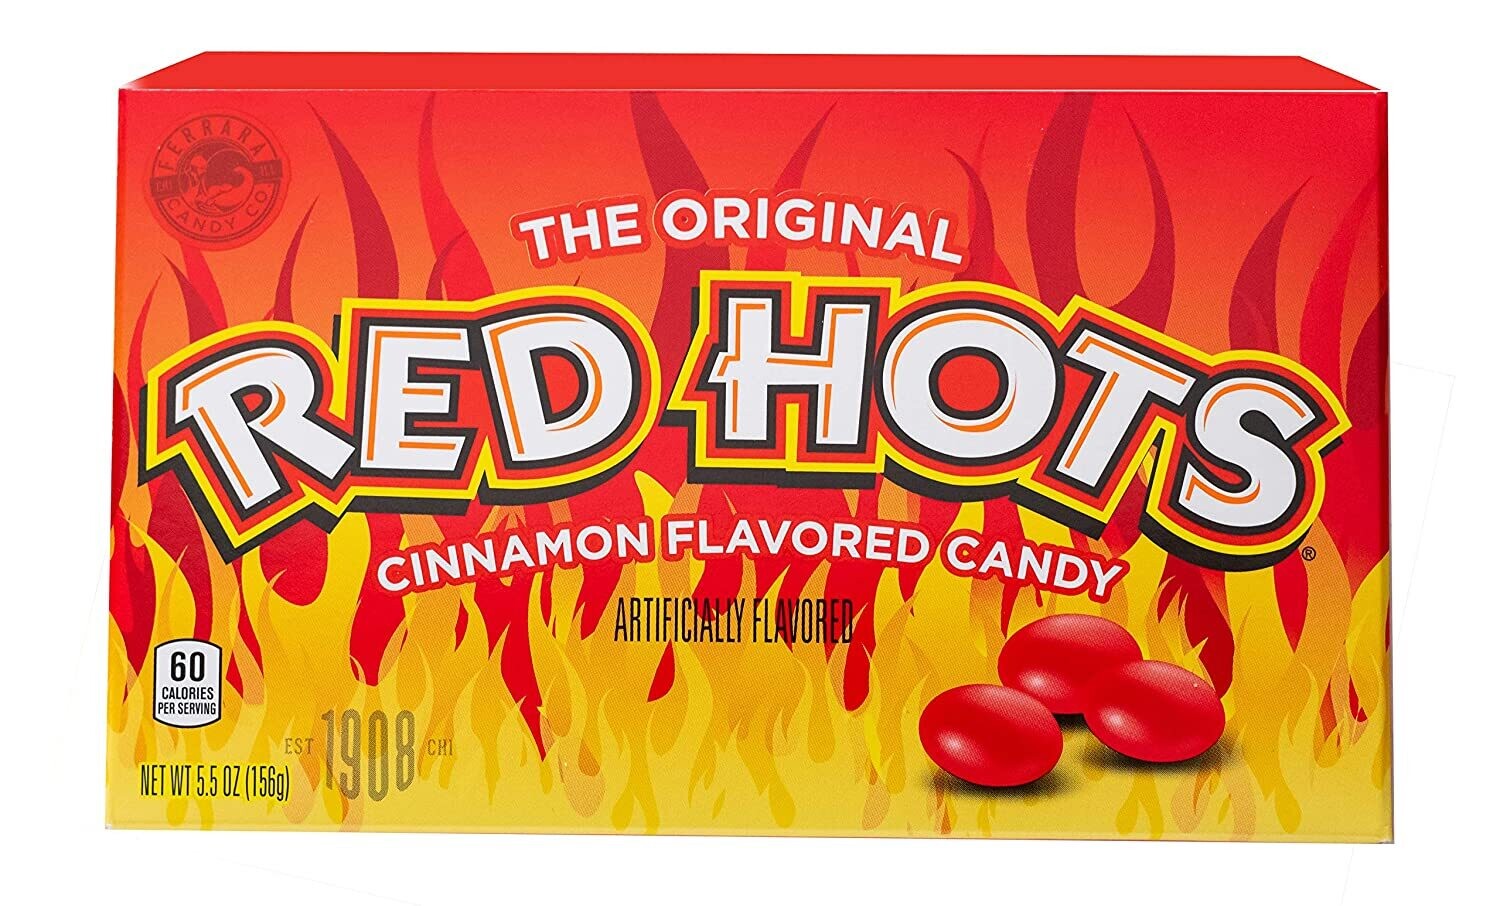 Red Hots 5.5oz Theater Box